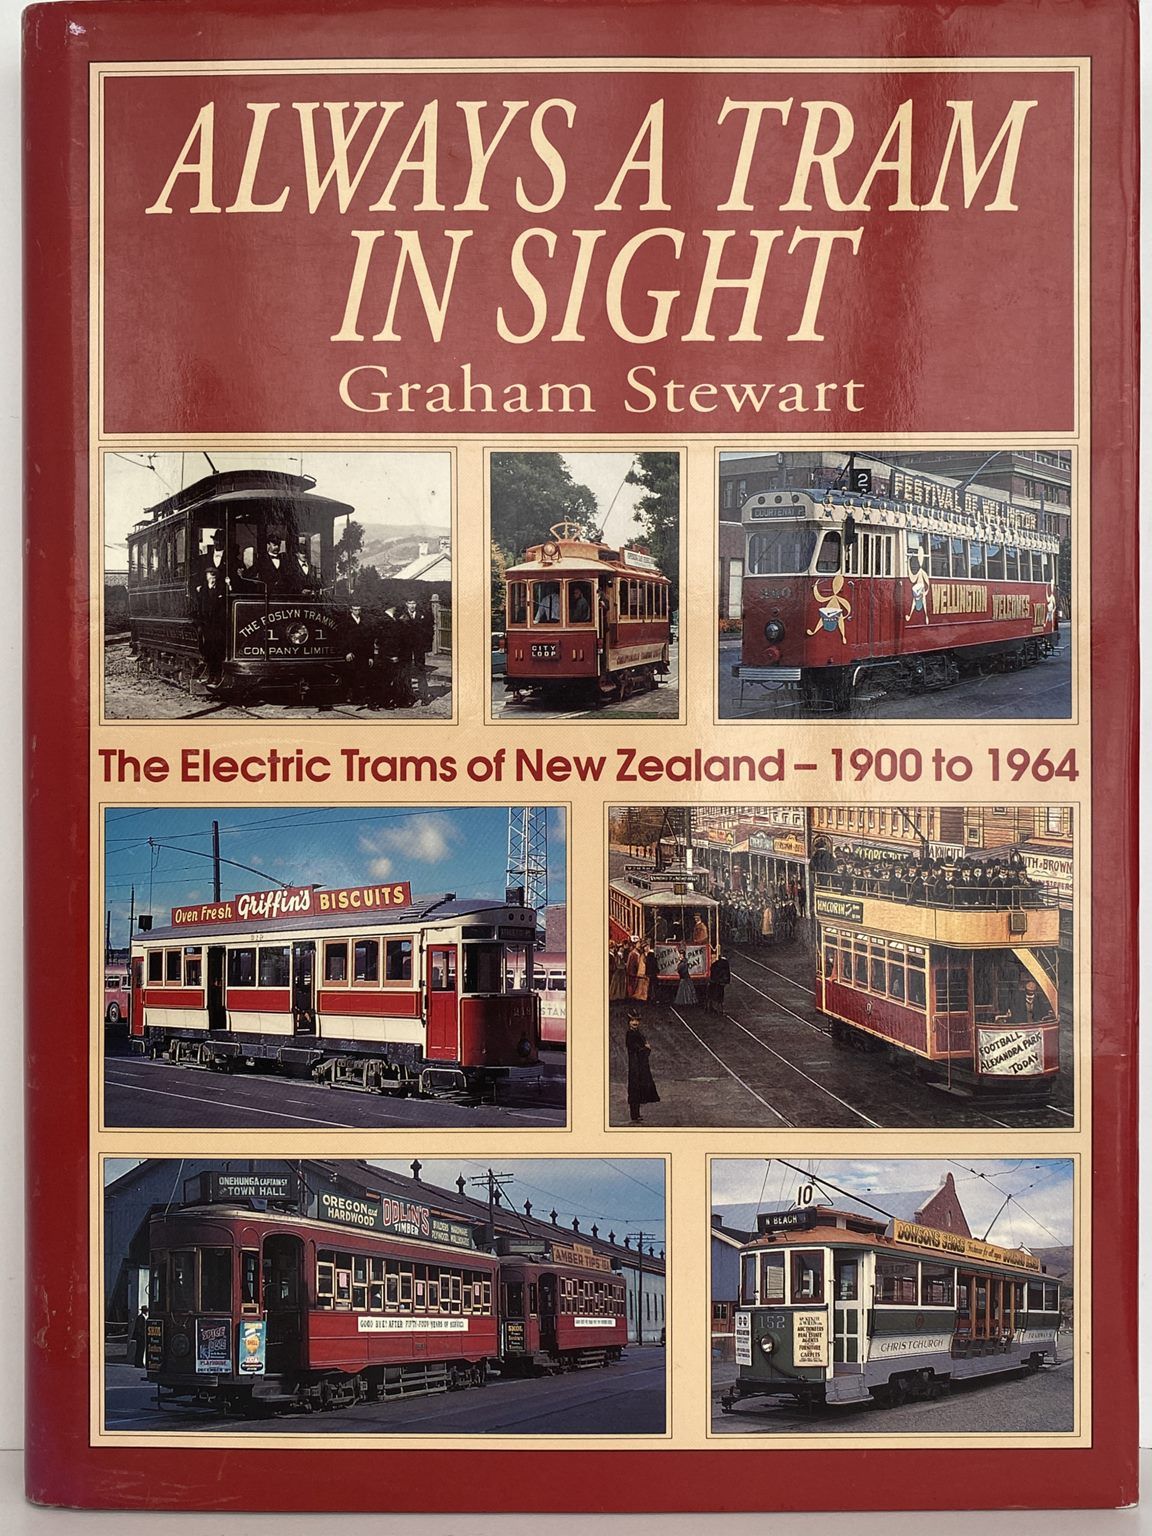 ALWAYS A TRAM IN SIGHT: Electric Trams of New Zealand 1900 to 1964